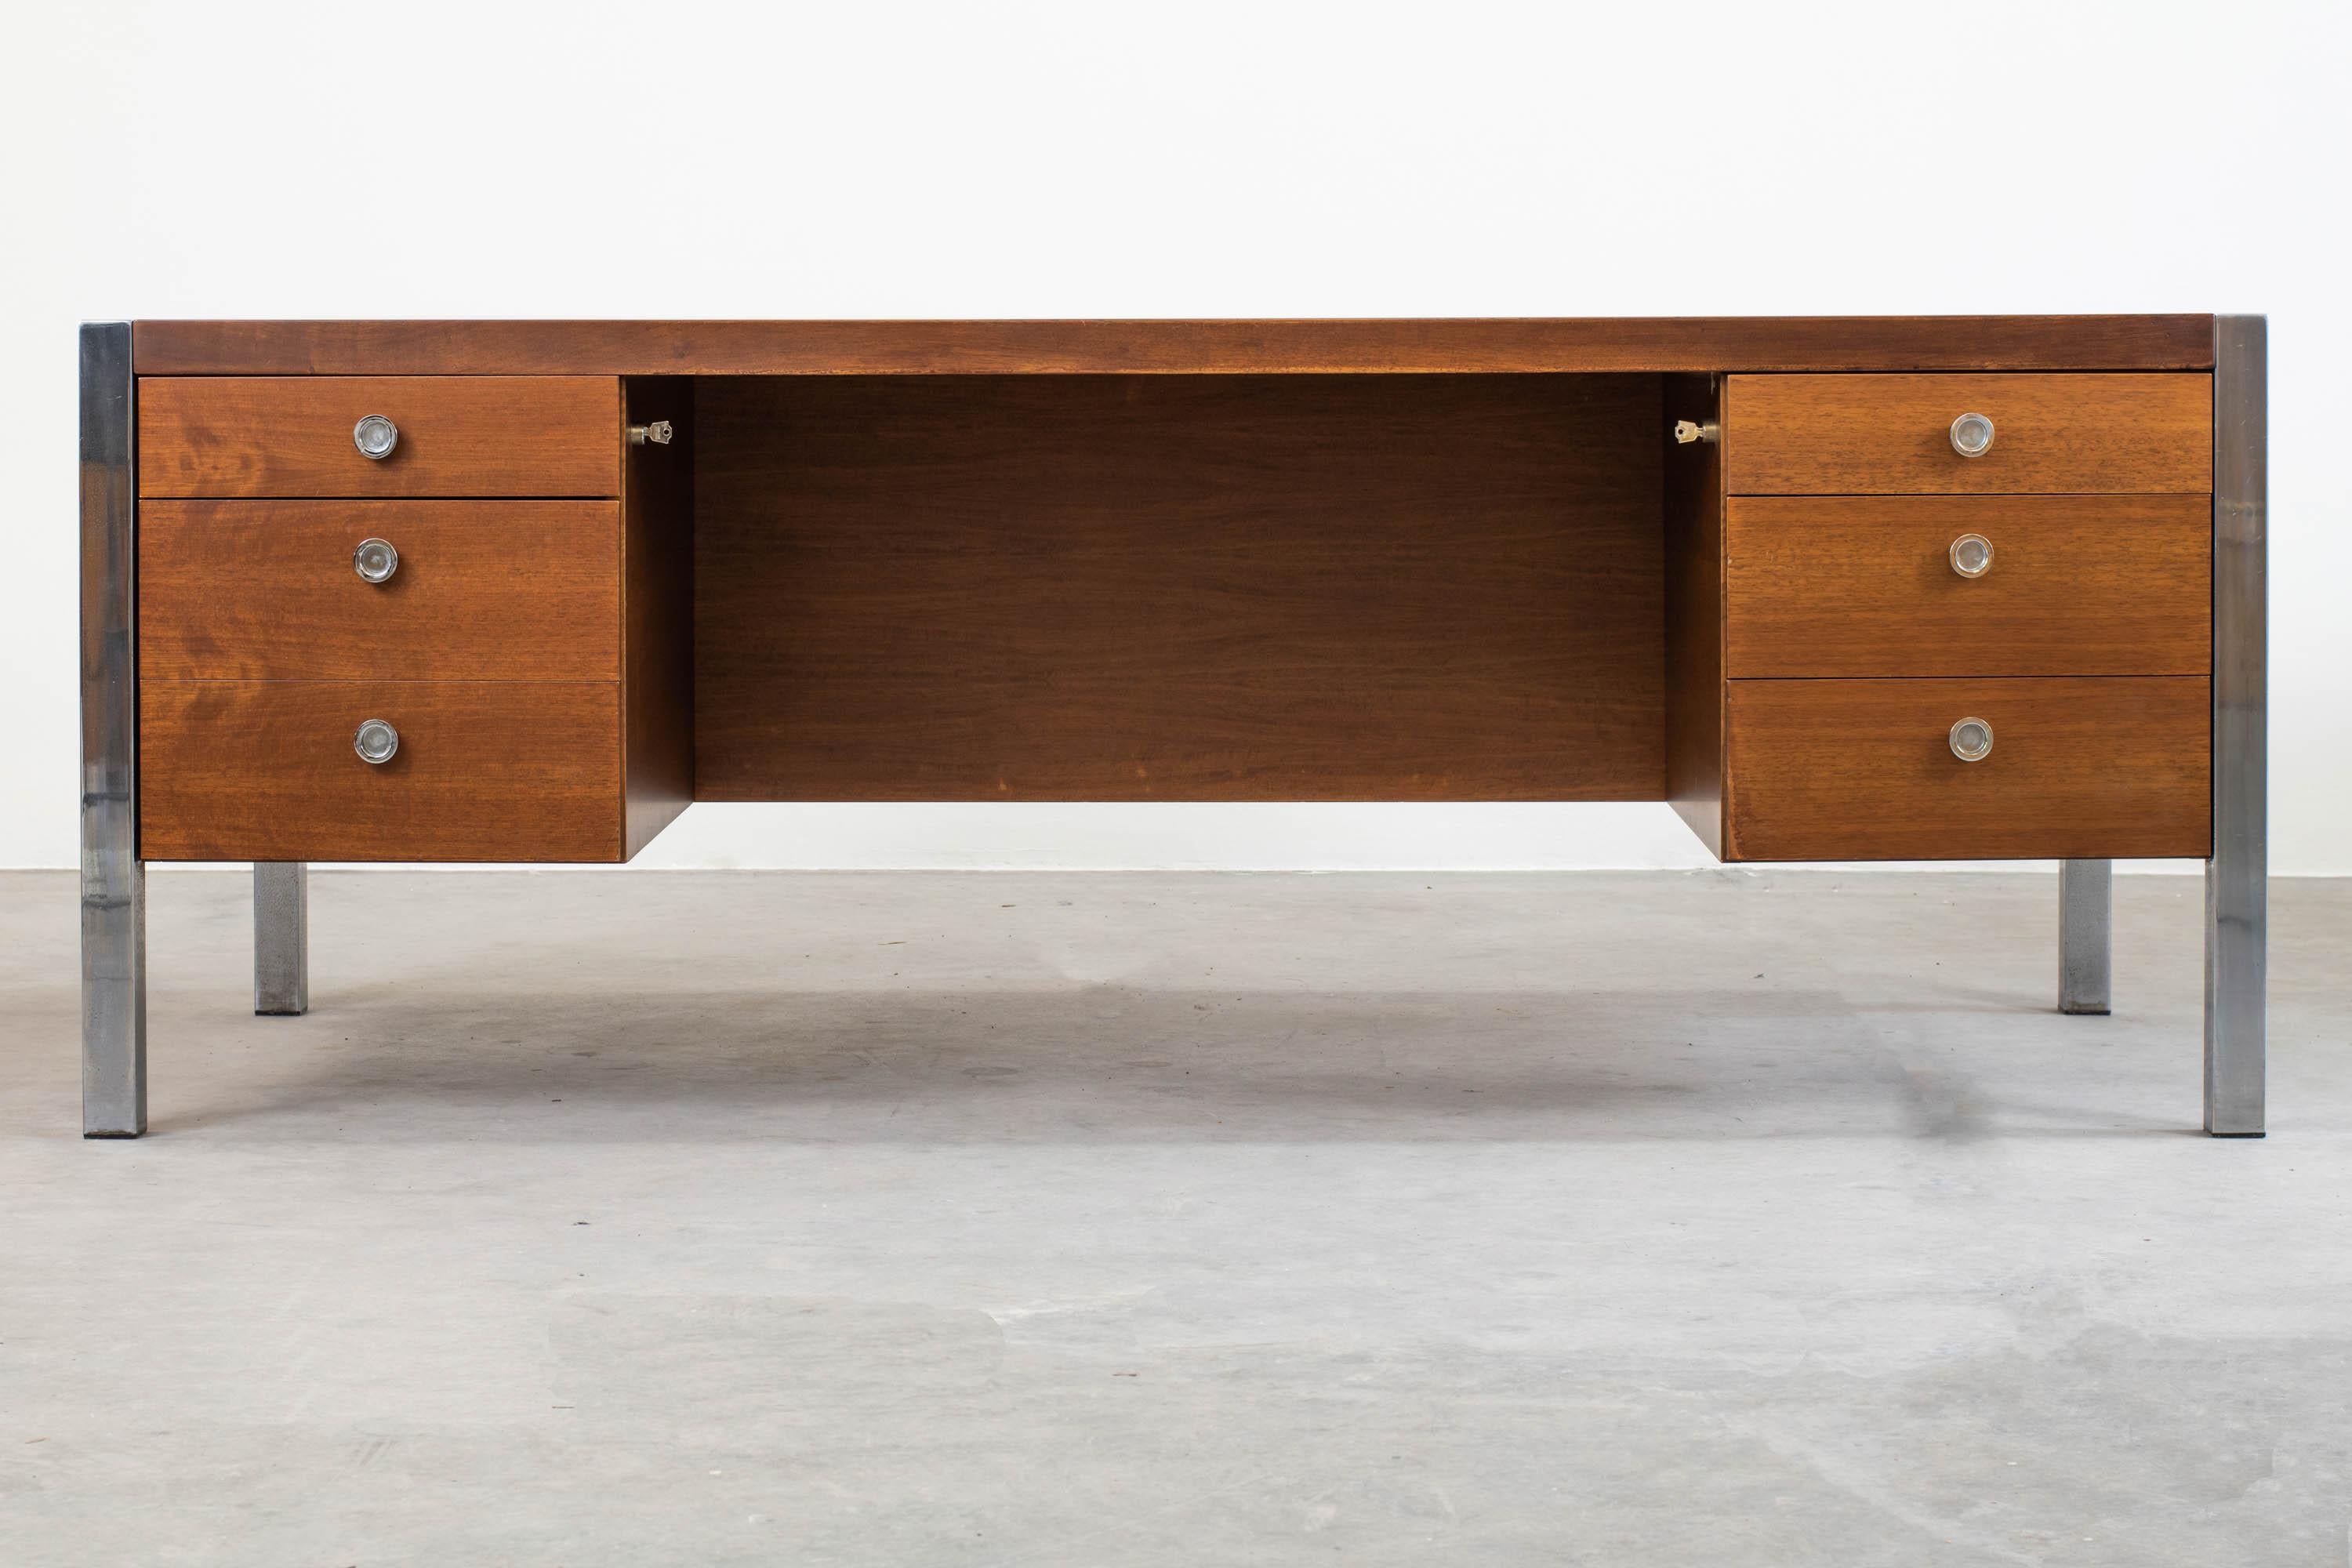 Tecnika desk with drawers, in veneered wood and chromed steel details (handles and frame). 
Designed by Ettore Sottsass and produced by Poltronova Production Design Center, Florence, 1970s.

Ettore Sottsass jr. was an Italian architect and